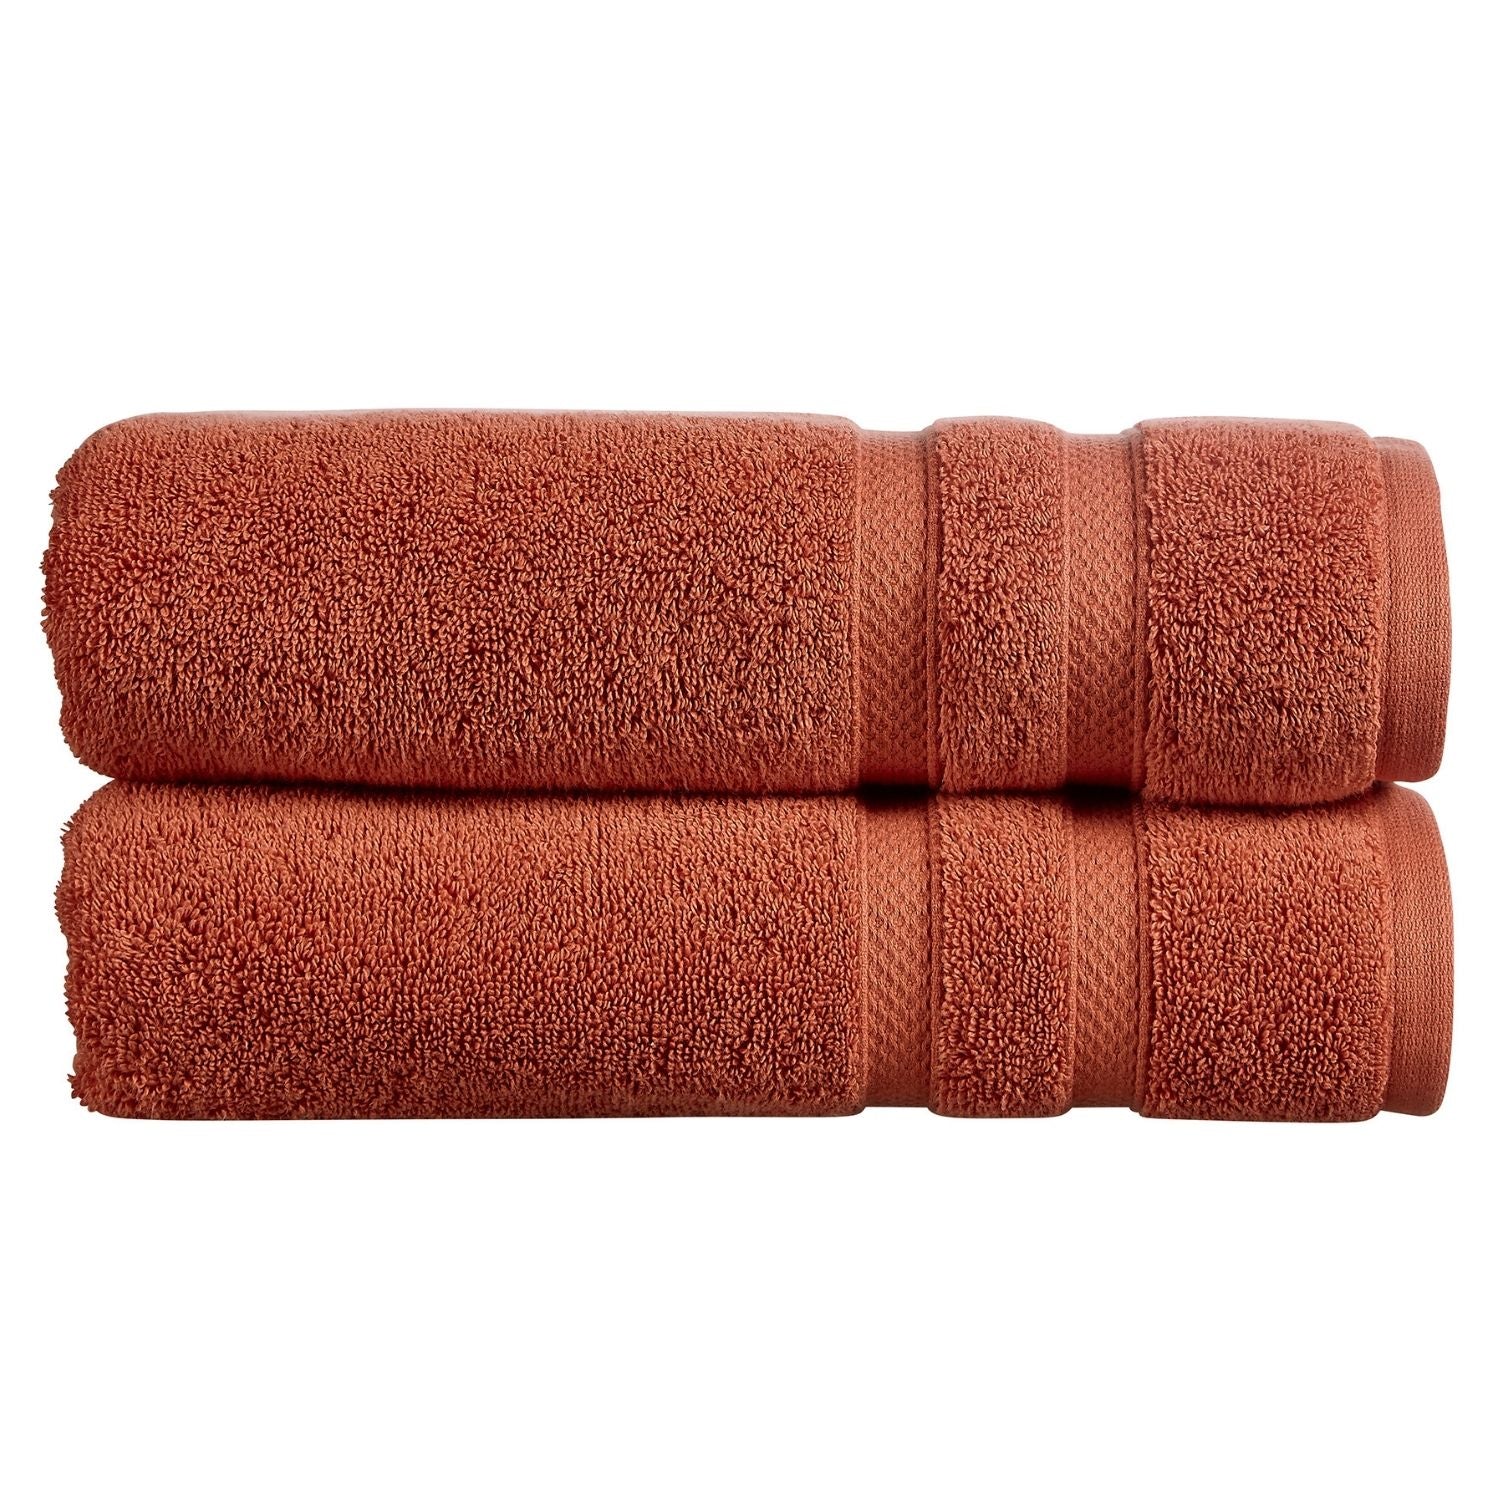 Christy Chroma Hand Towel - Burnt Sienna 1 Shaws Department Stores